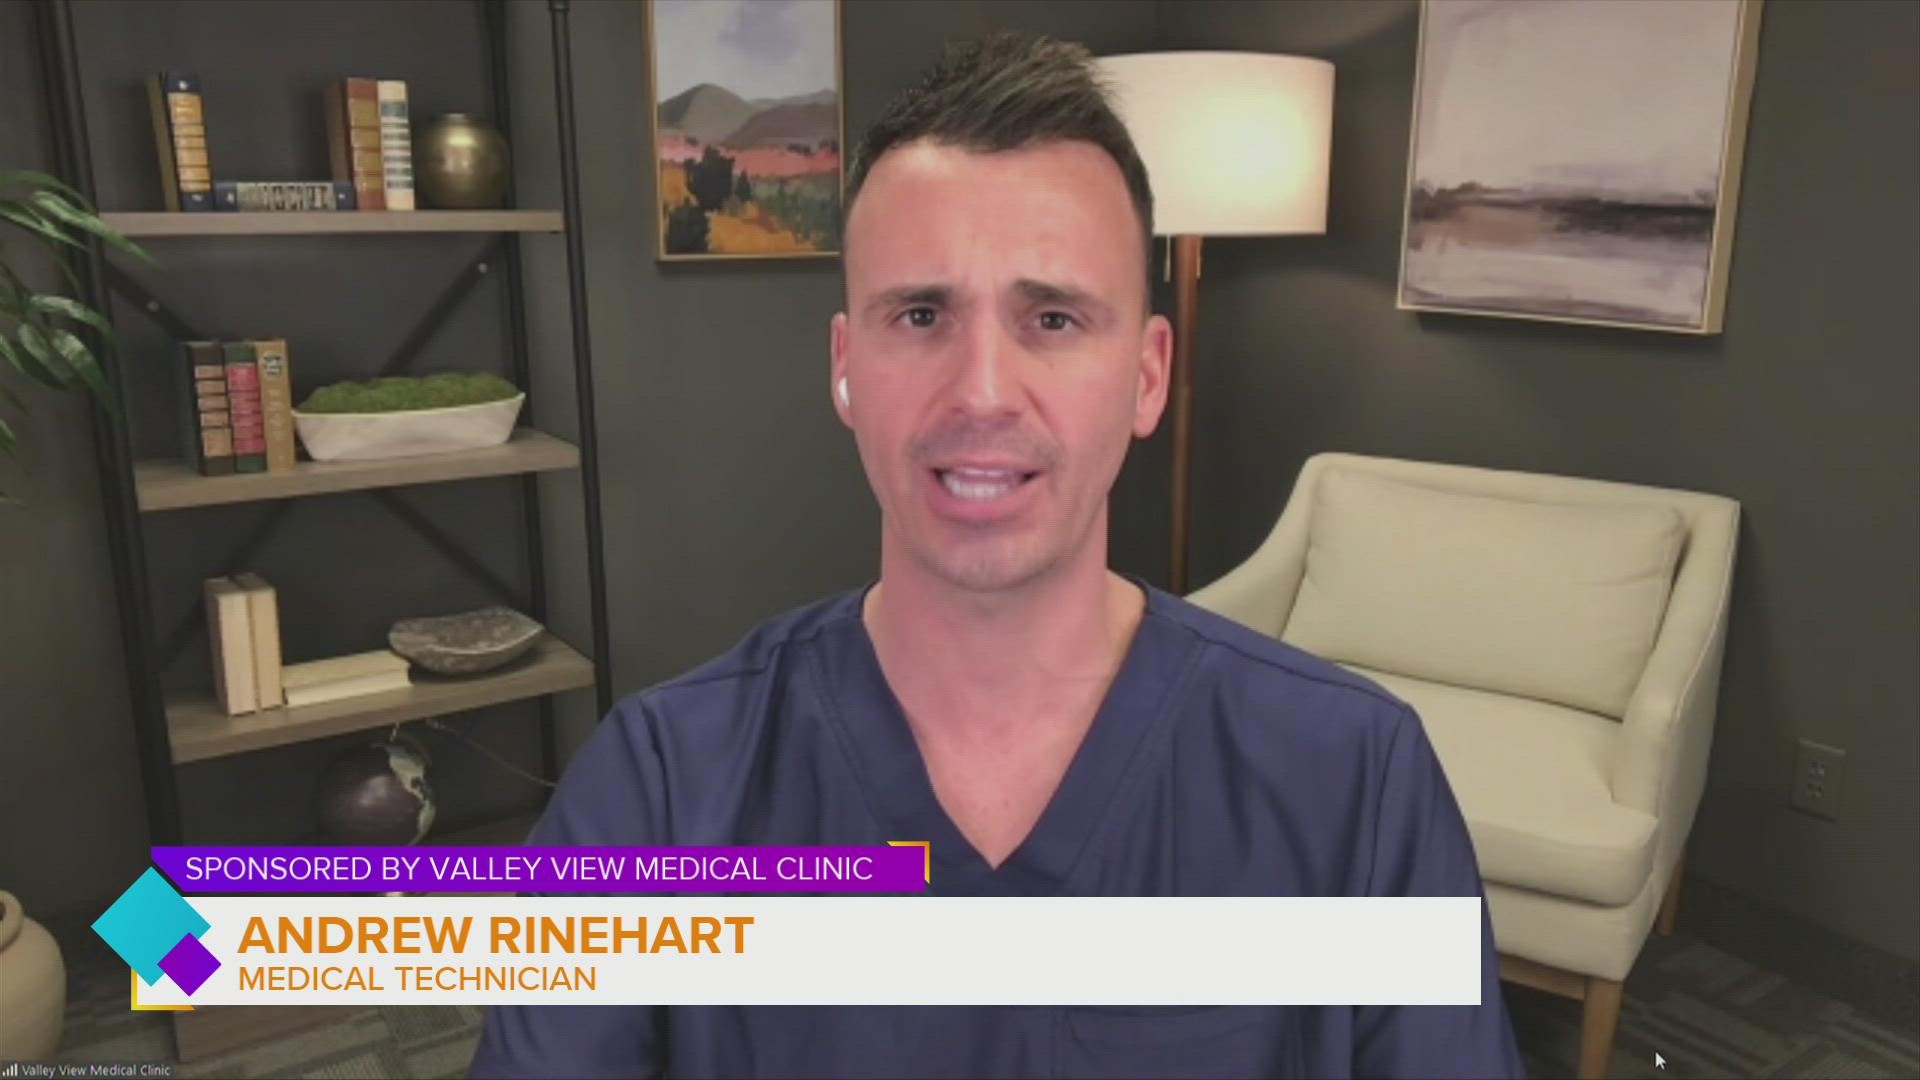 Andrew Rinehart, Medical Technician, tells us about the unique services offered for men at Valley View Medical Clinic in Pleasant Hill | Paid Content